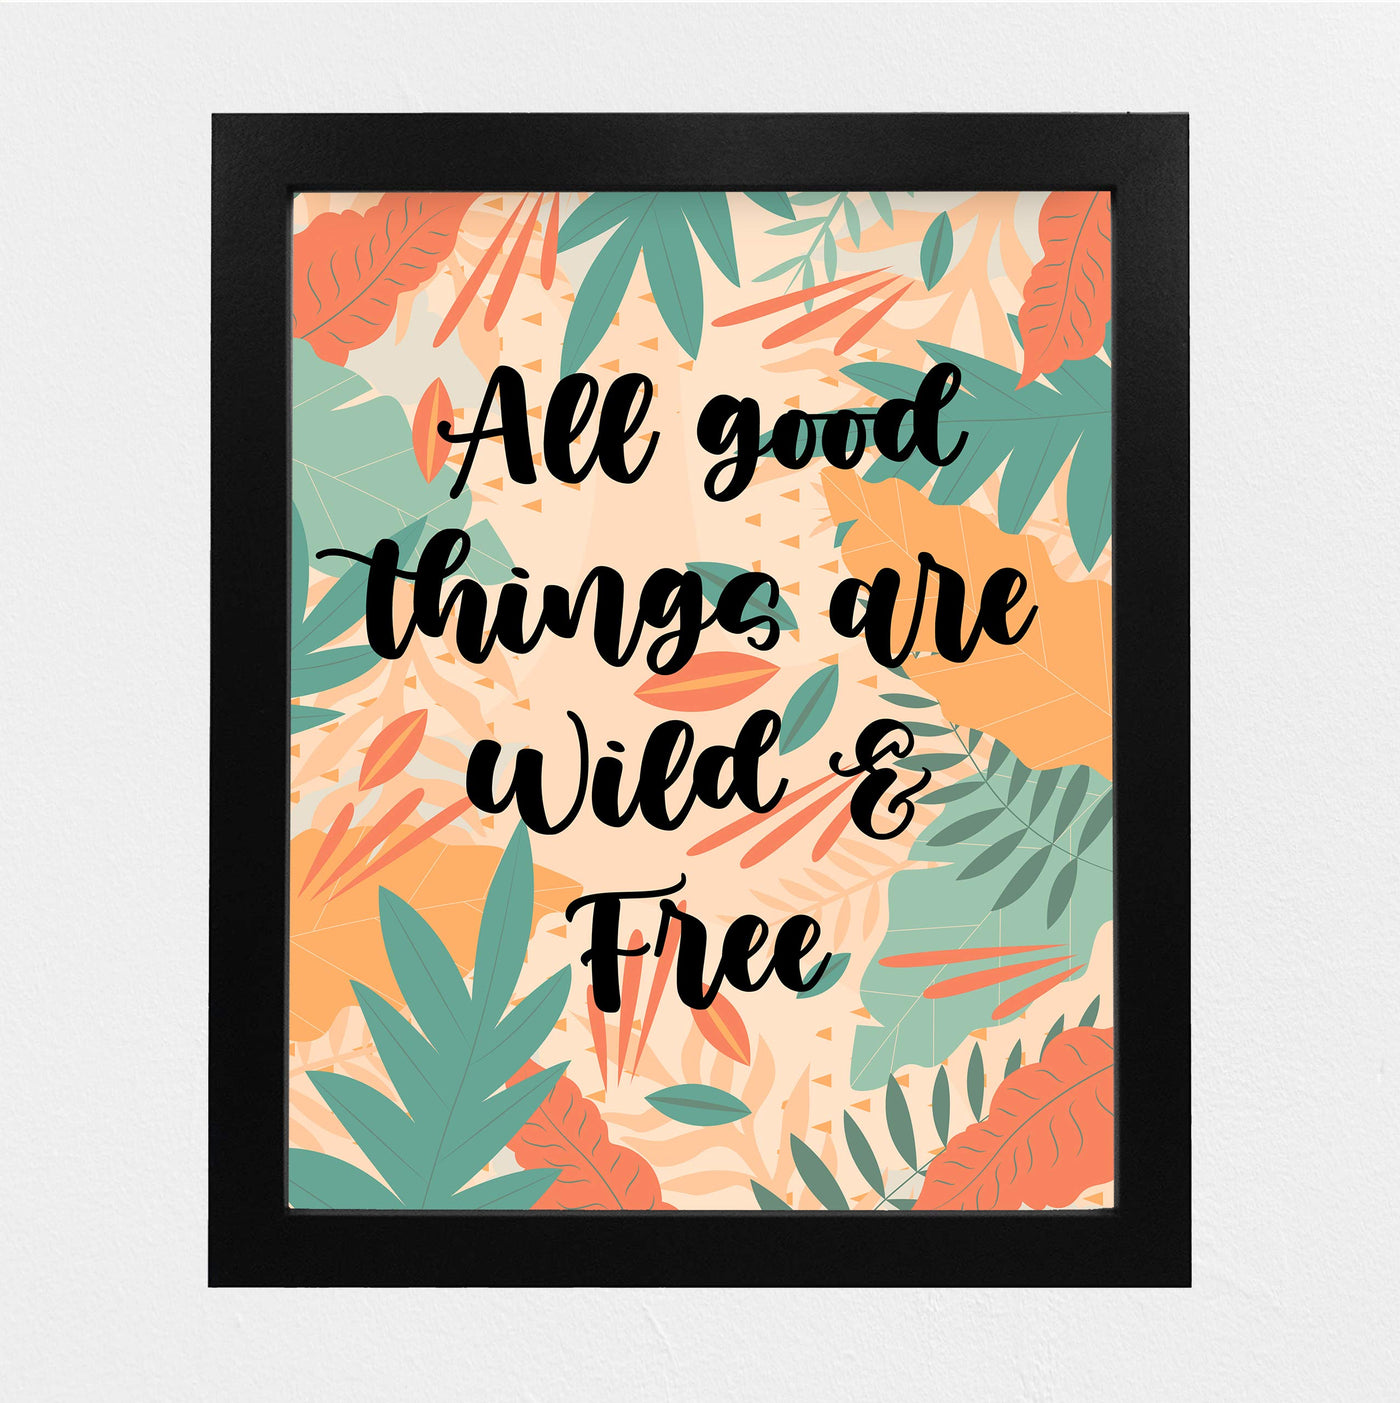 All Good Things Are Wild and Free Inspirational Quotes Wall Art -8 x 10" Abstract Floral Safari Poster Print-Ready to Frame. Perfect Home-Office-Studio-School-Dorm Decor. Great Motivational Gift!